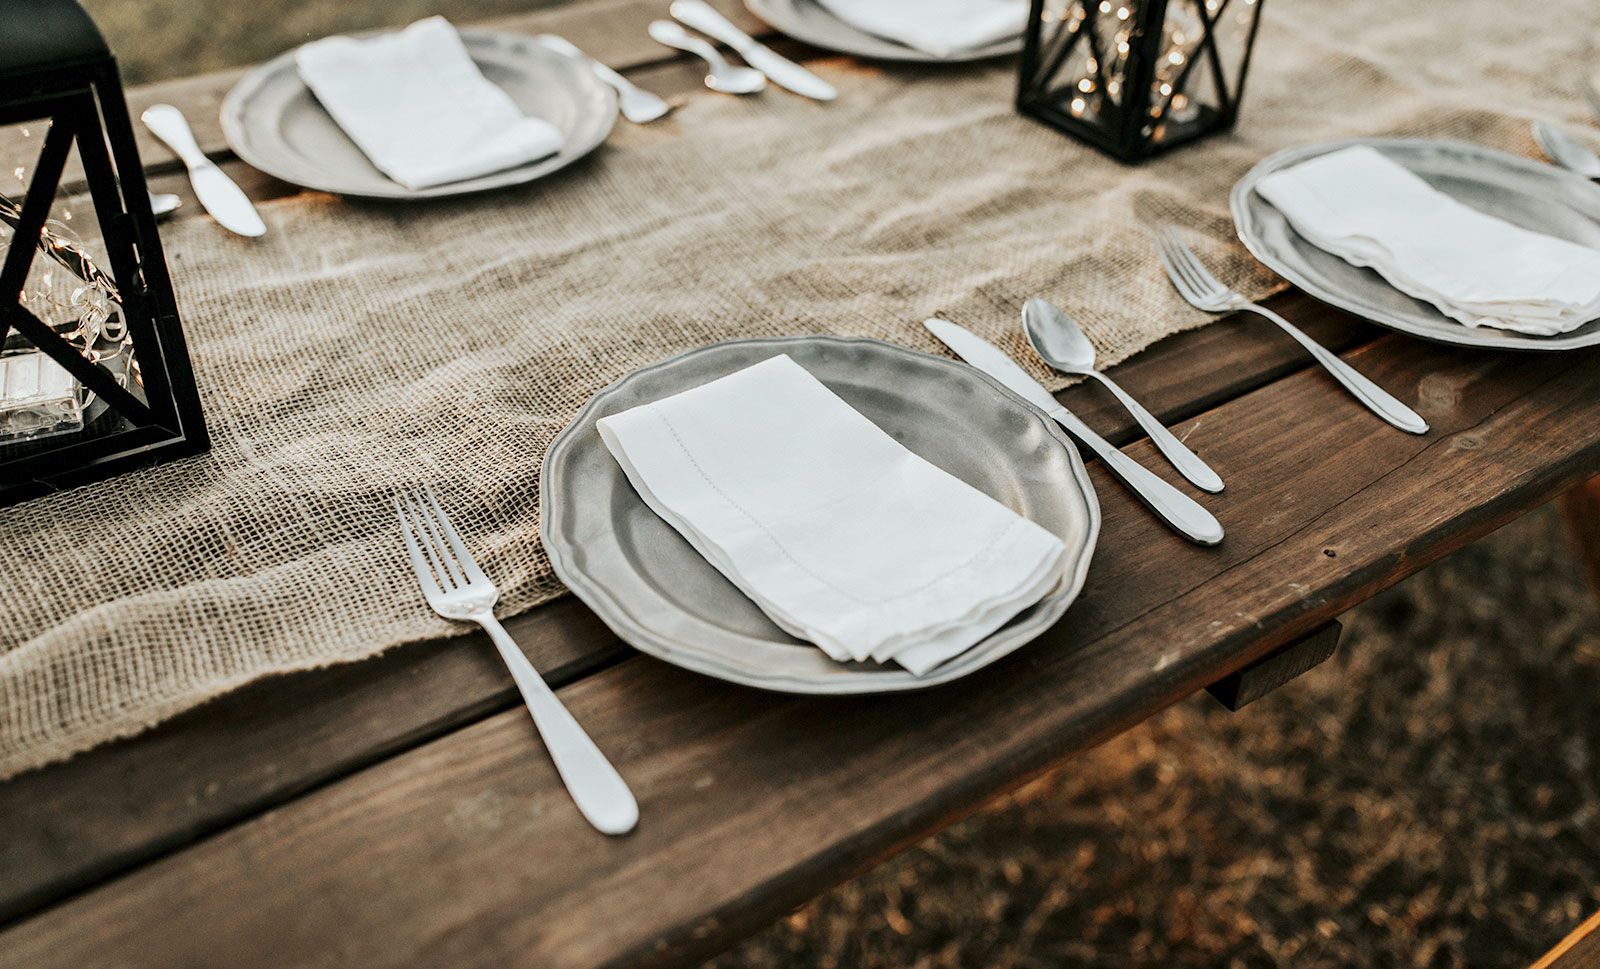 A table with dining utensils